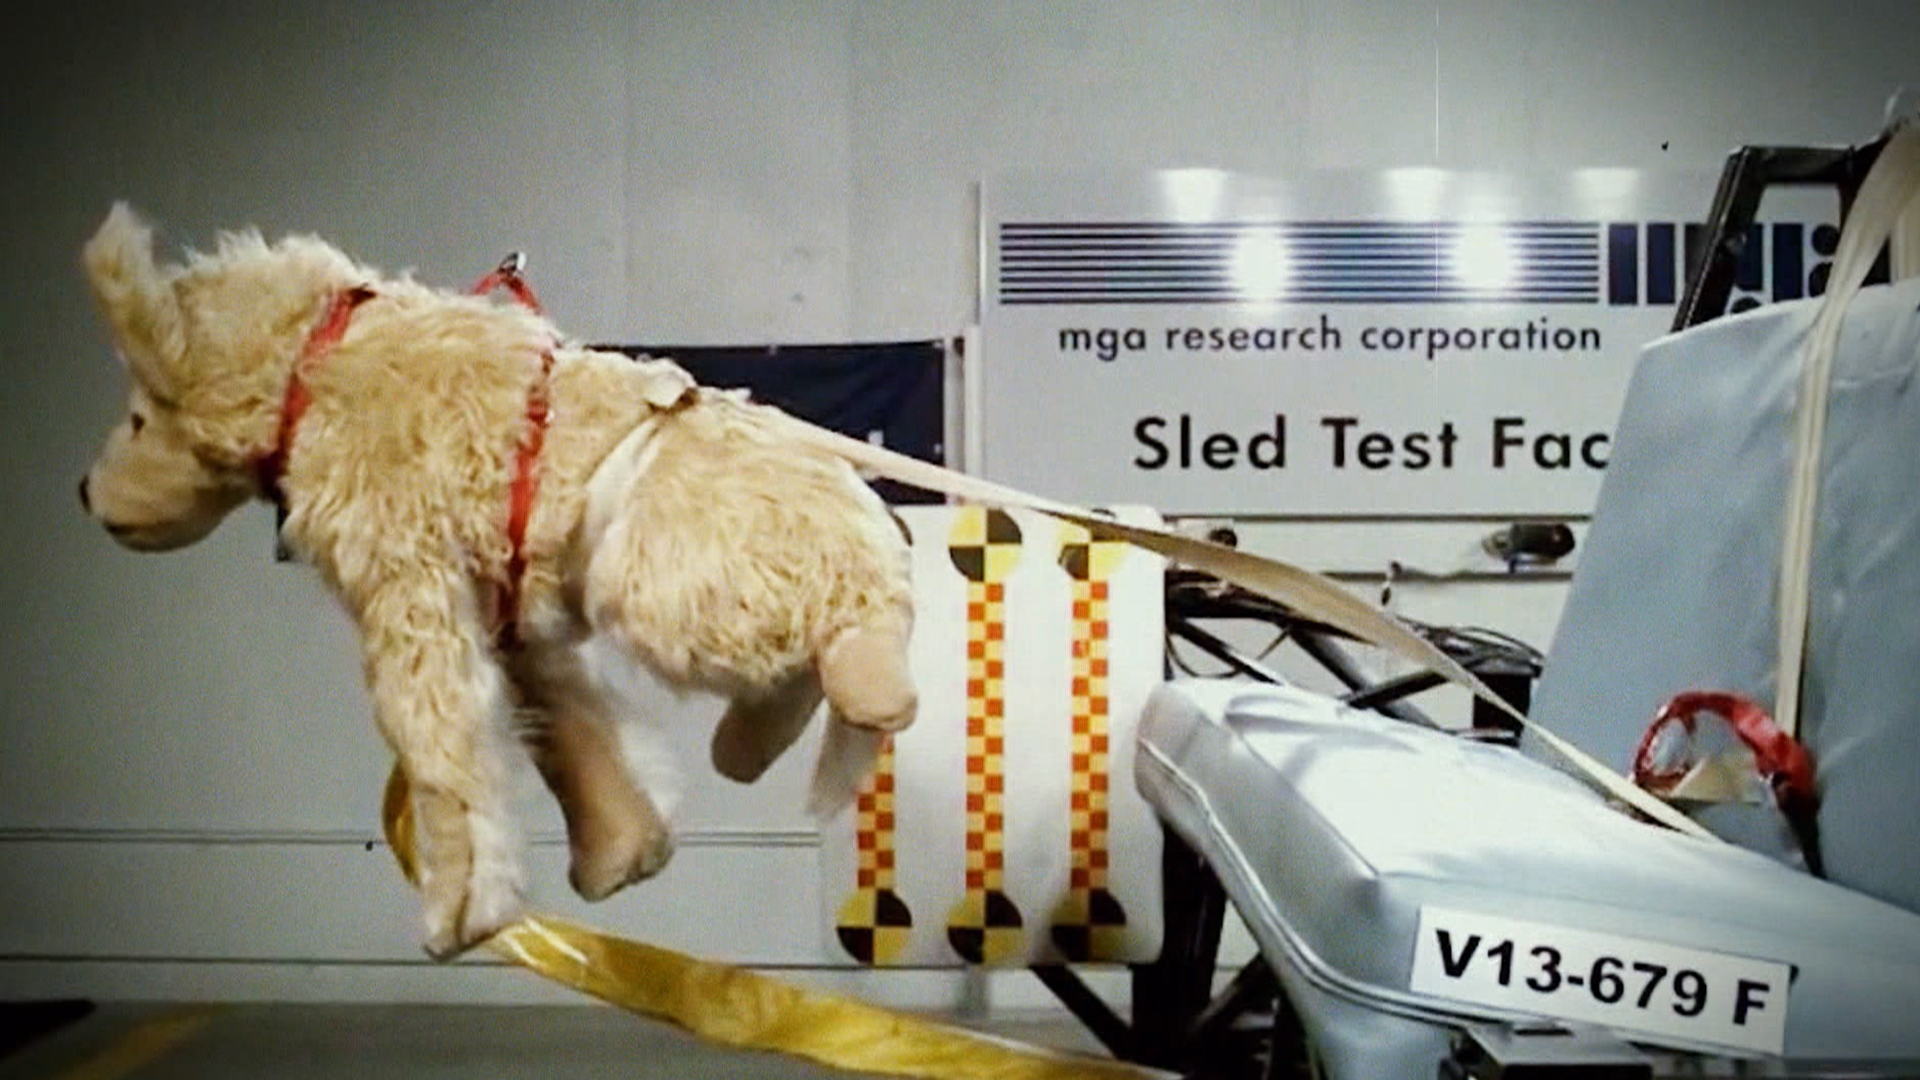 Most safety restraints for pets in cars fail crash tests - TODAY.com